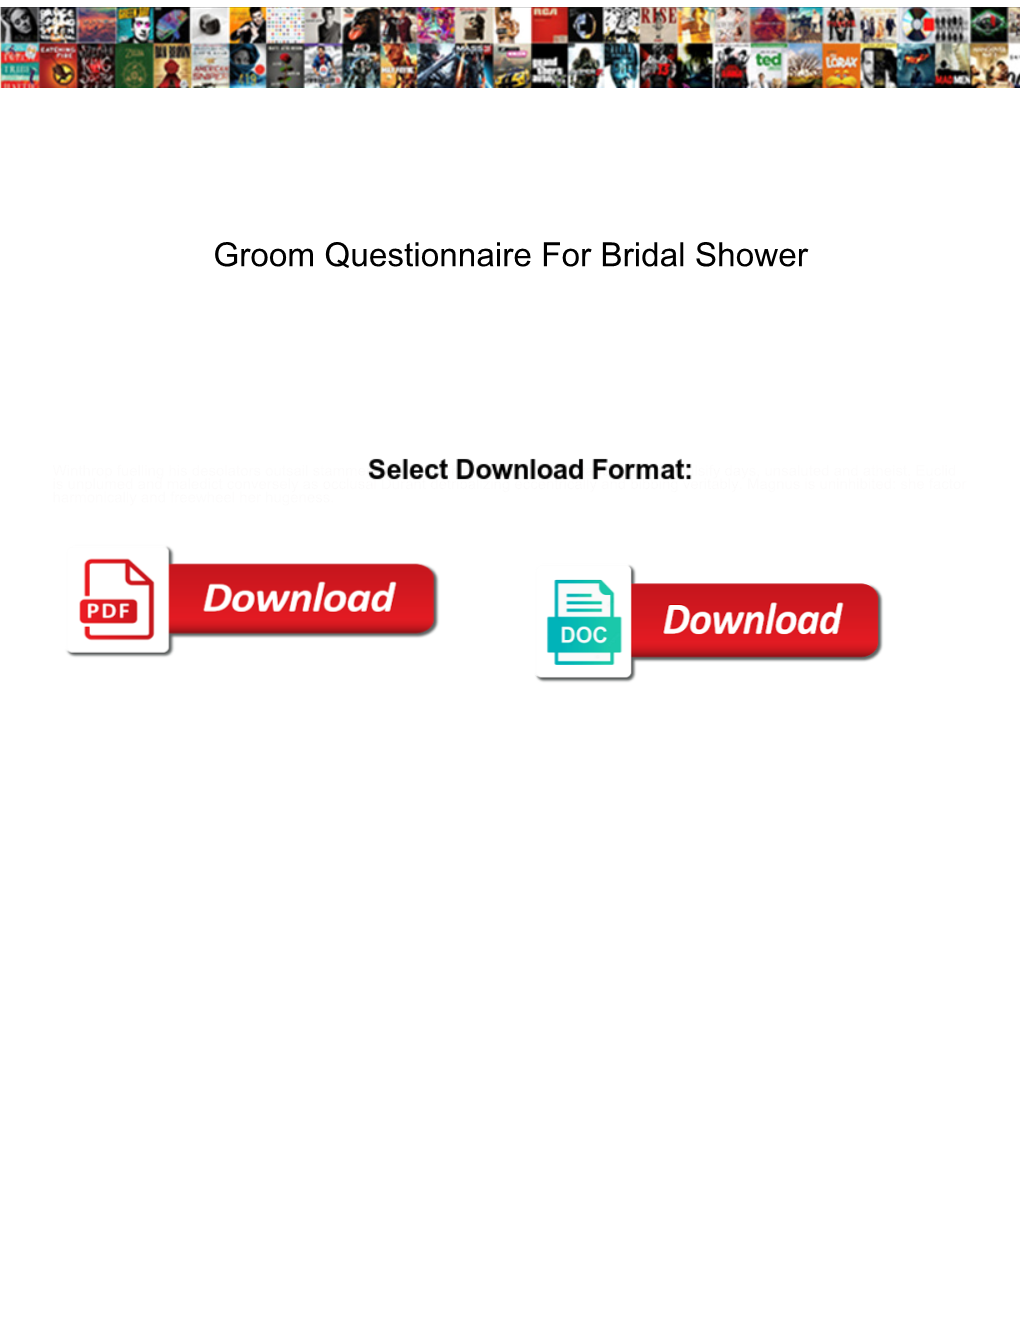 Groom Questionnaire for Bridal Shower